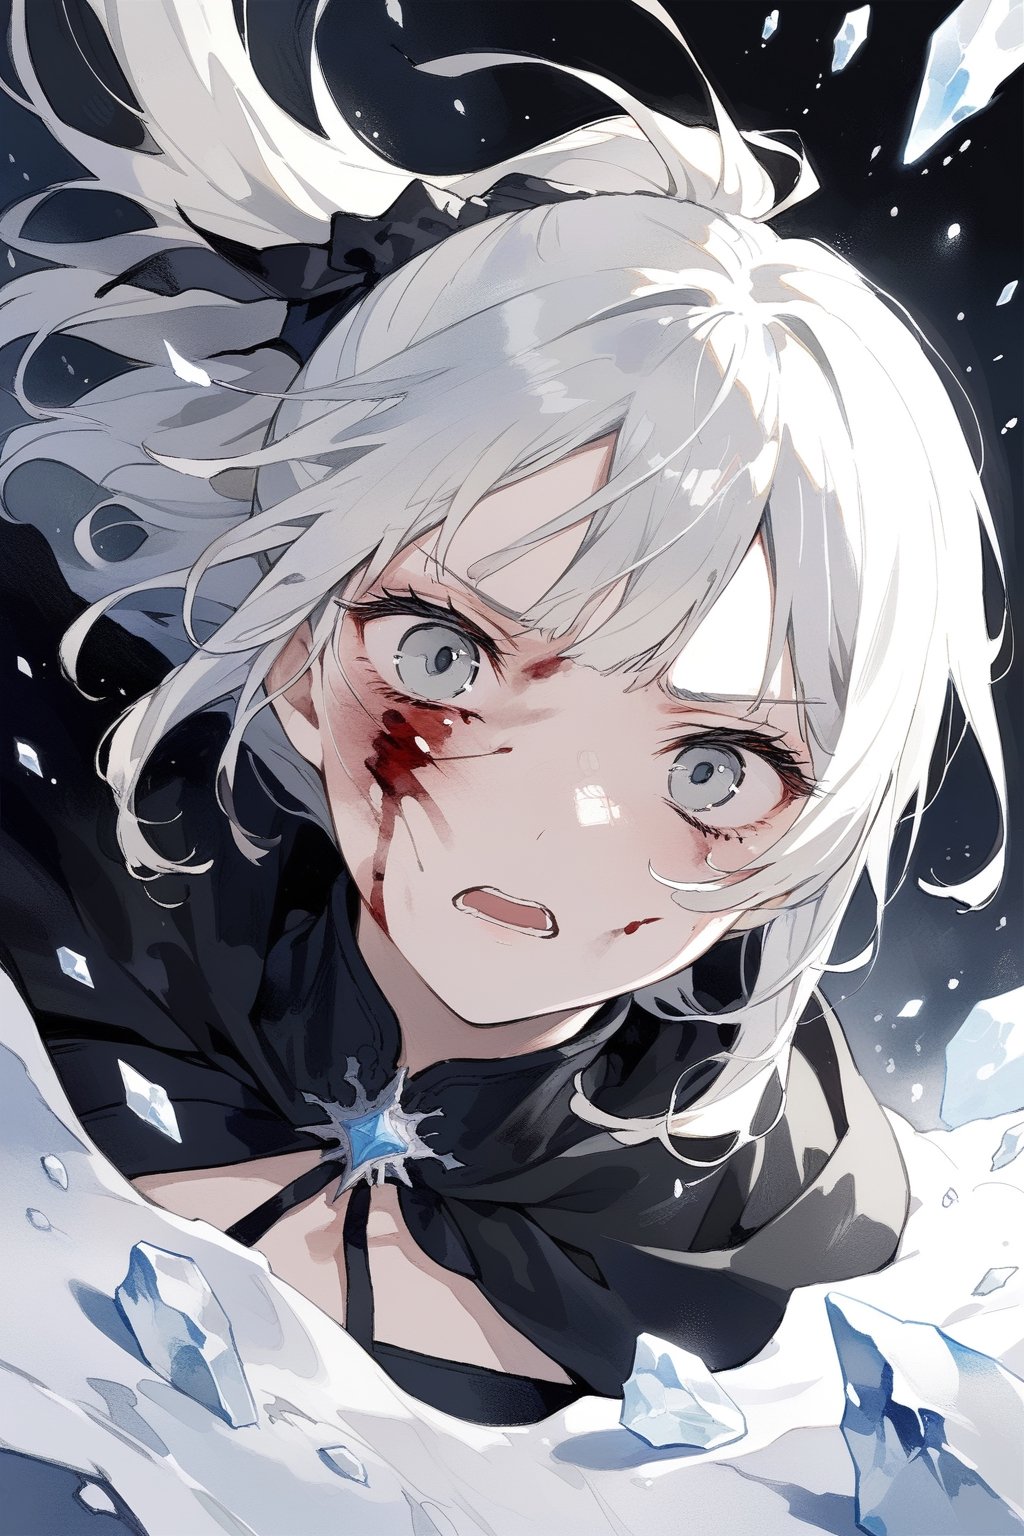 white hair in a ponytail with bangs, grey eyes, look of shock and dispair, battlefield, black robes, masterpiece, best quality,aesthetic,dark art,blood on face, wounds, more detail XL, desperation, Ice magic, ice,